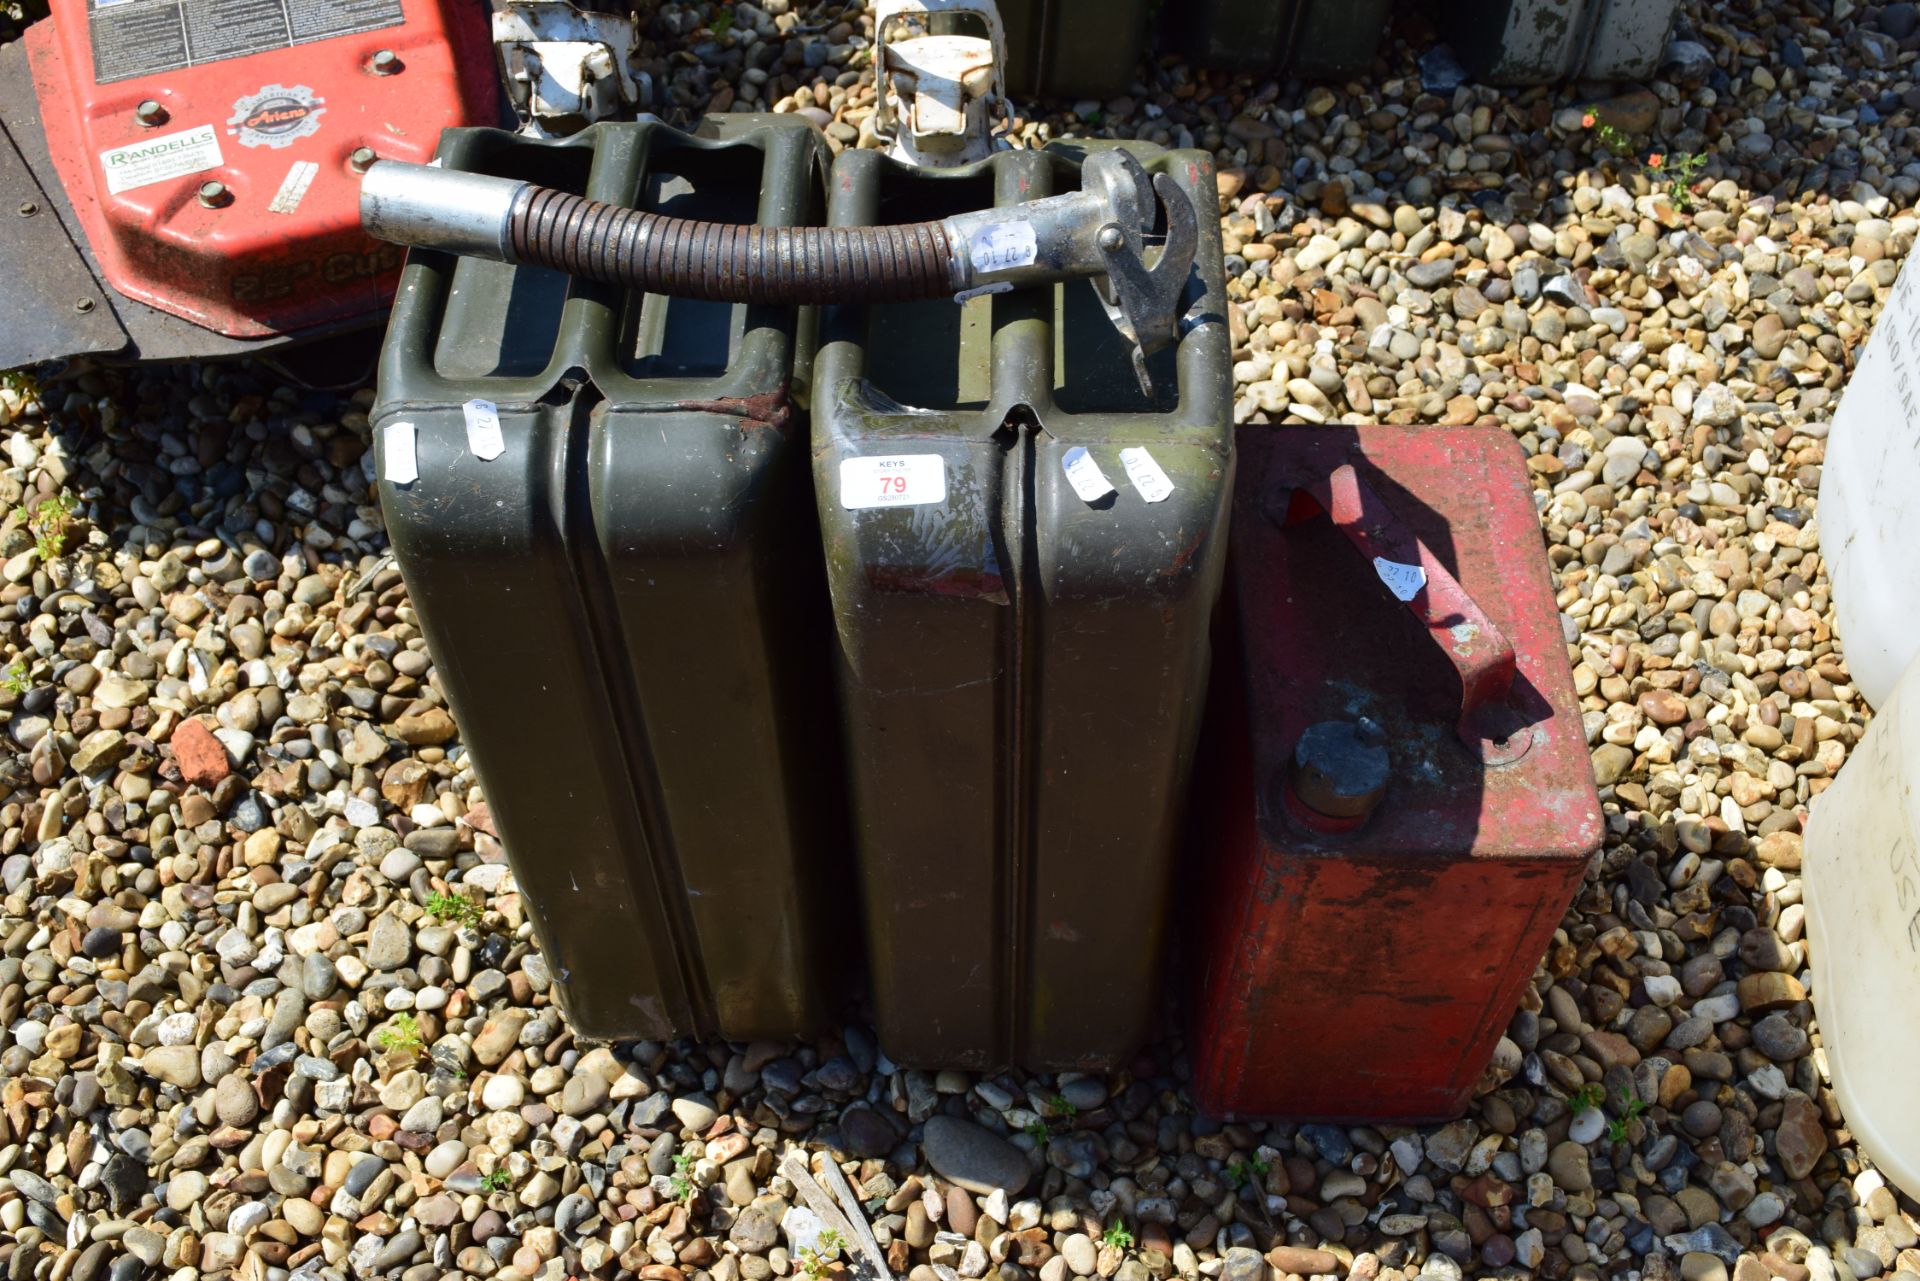 TWO 20LTR JERRY CANS WITH A SPOUT ATTACHMENT AND ONE OTHER JERRY CAN